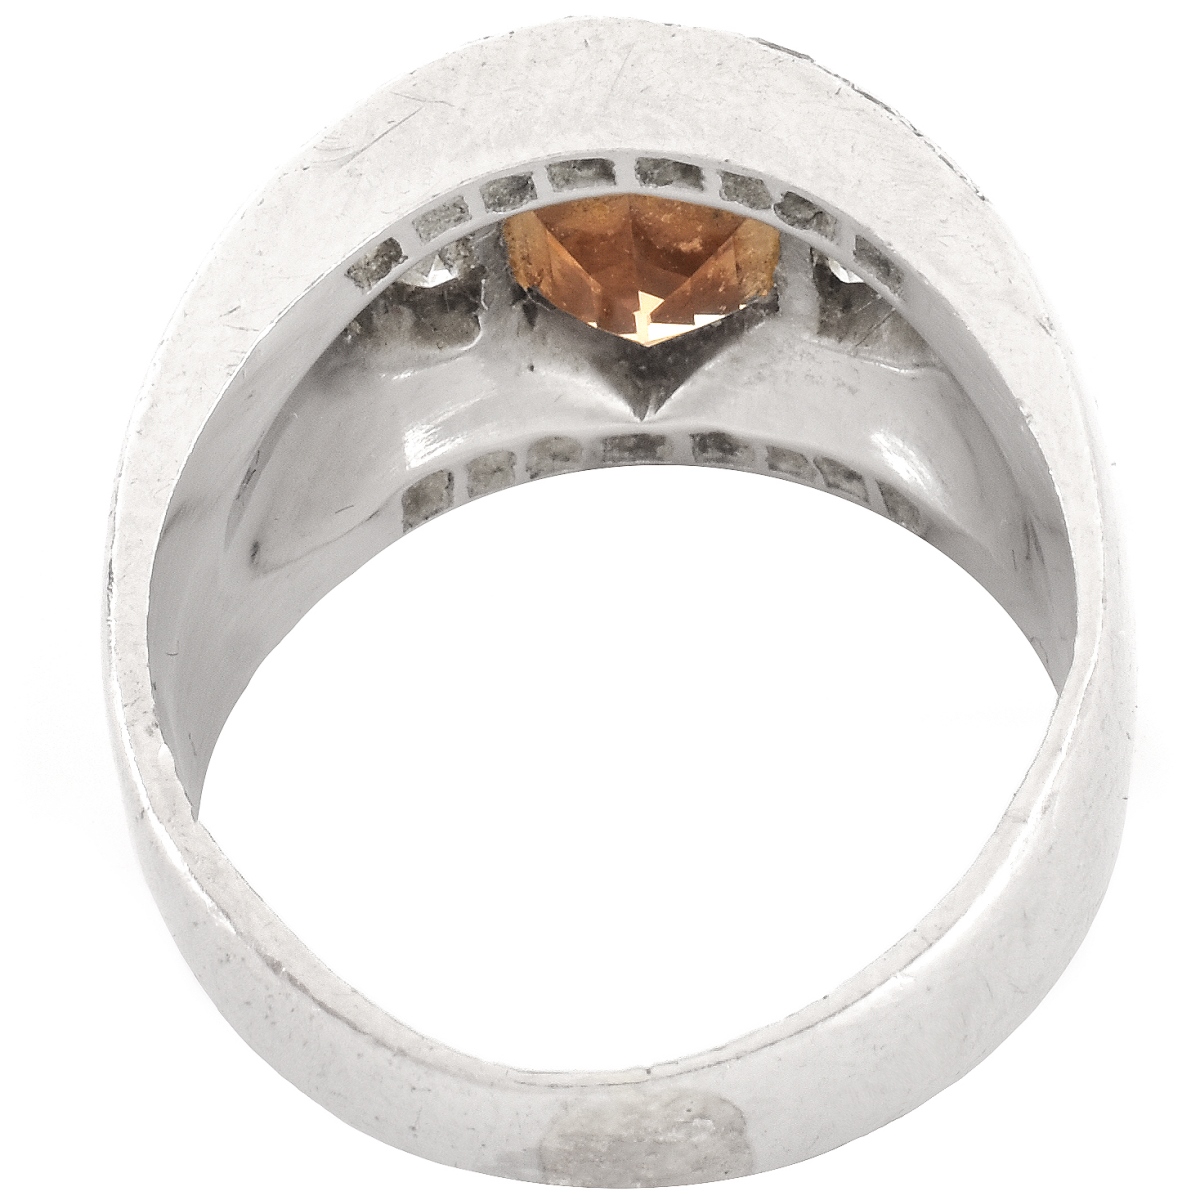 Fancy Brown Diamond and Platinum Ring